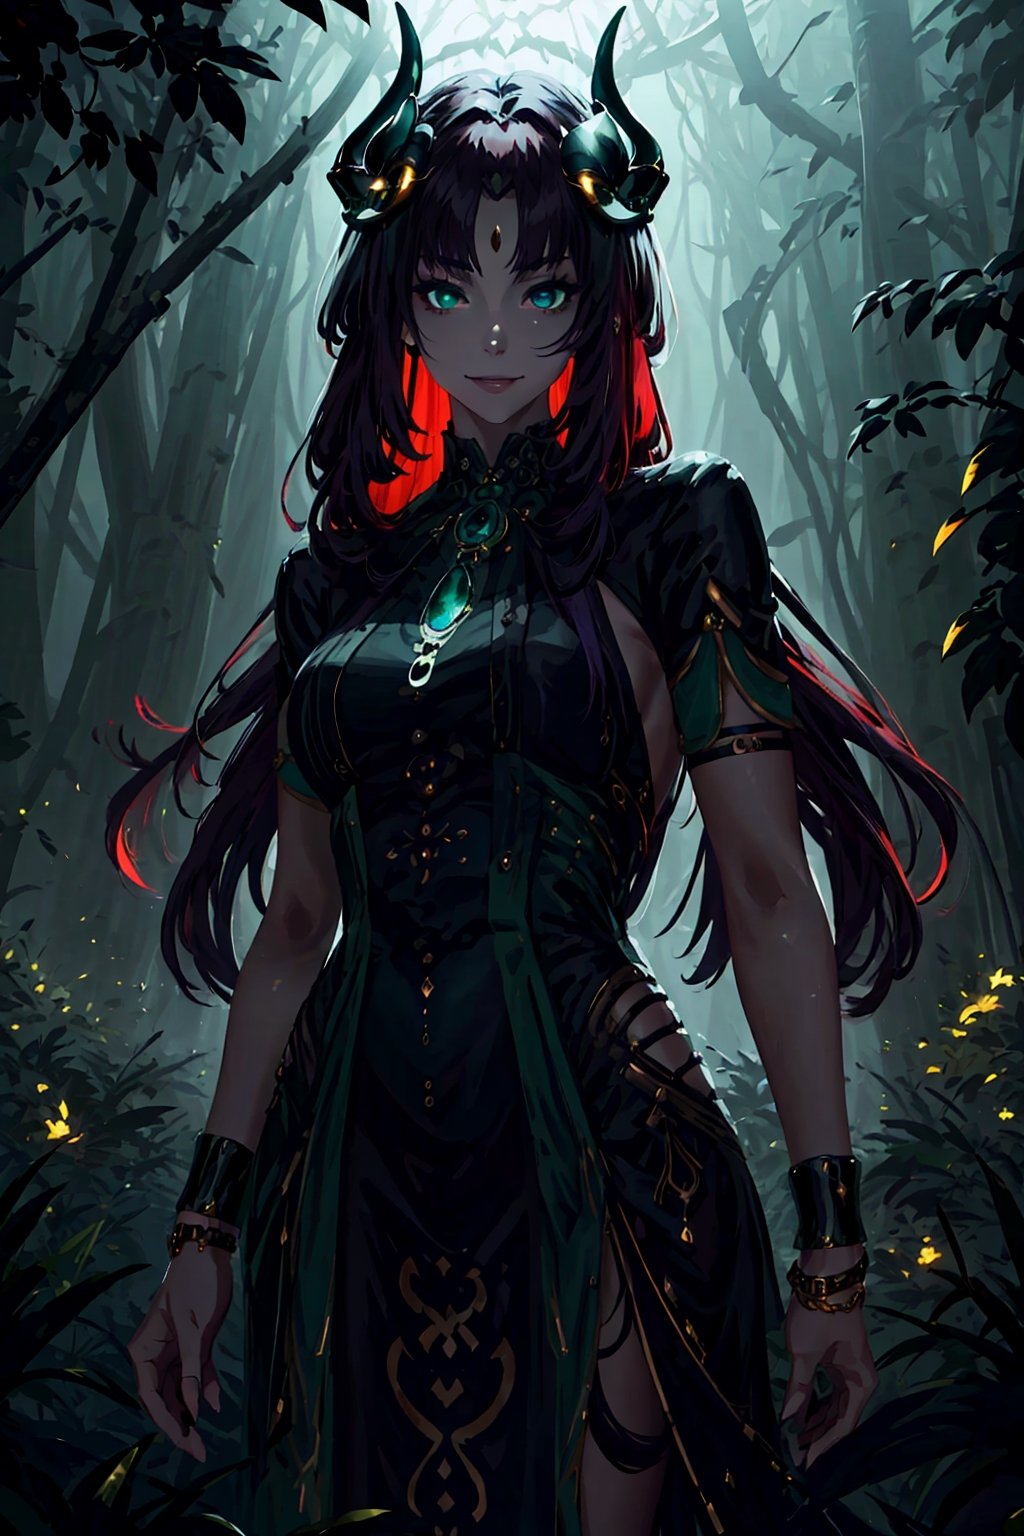 Imagine a beautiful woman with long and wild dark purple hair hair flowing freely around her. She has horns. Her dragon eyes are bright green, sparkling with intricate detail. She smiles like she is scheming something. She wears a gorgeous dress with a fine touch and she wears fine jewelery. The background is a creepy forest with dim lighting, creating an ominous ambiance. She is surrounded by sparking magic. This artwork captures a creepy atmosphere against the backdrop of a beautiful yet dimly lit setting, detailed, detail_eyes, detailed_hair, detailed_scenario, detailed_hands, detailed_background. girl, fine clothing, ,nilou \(genshin impact\)